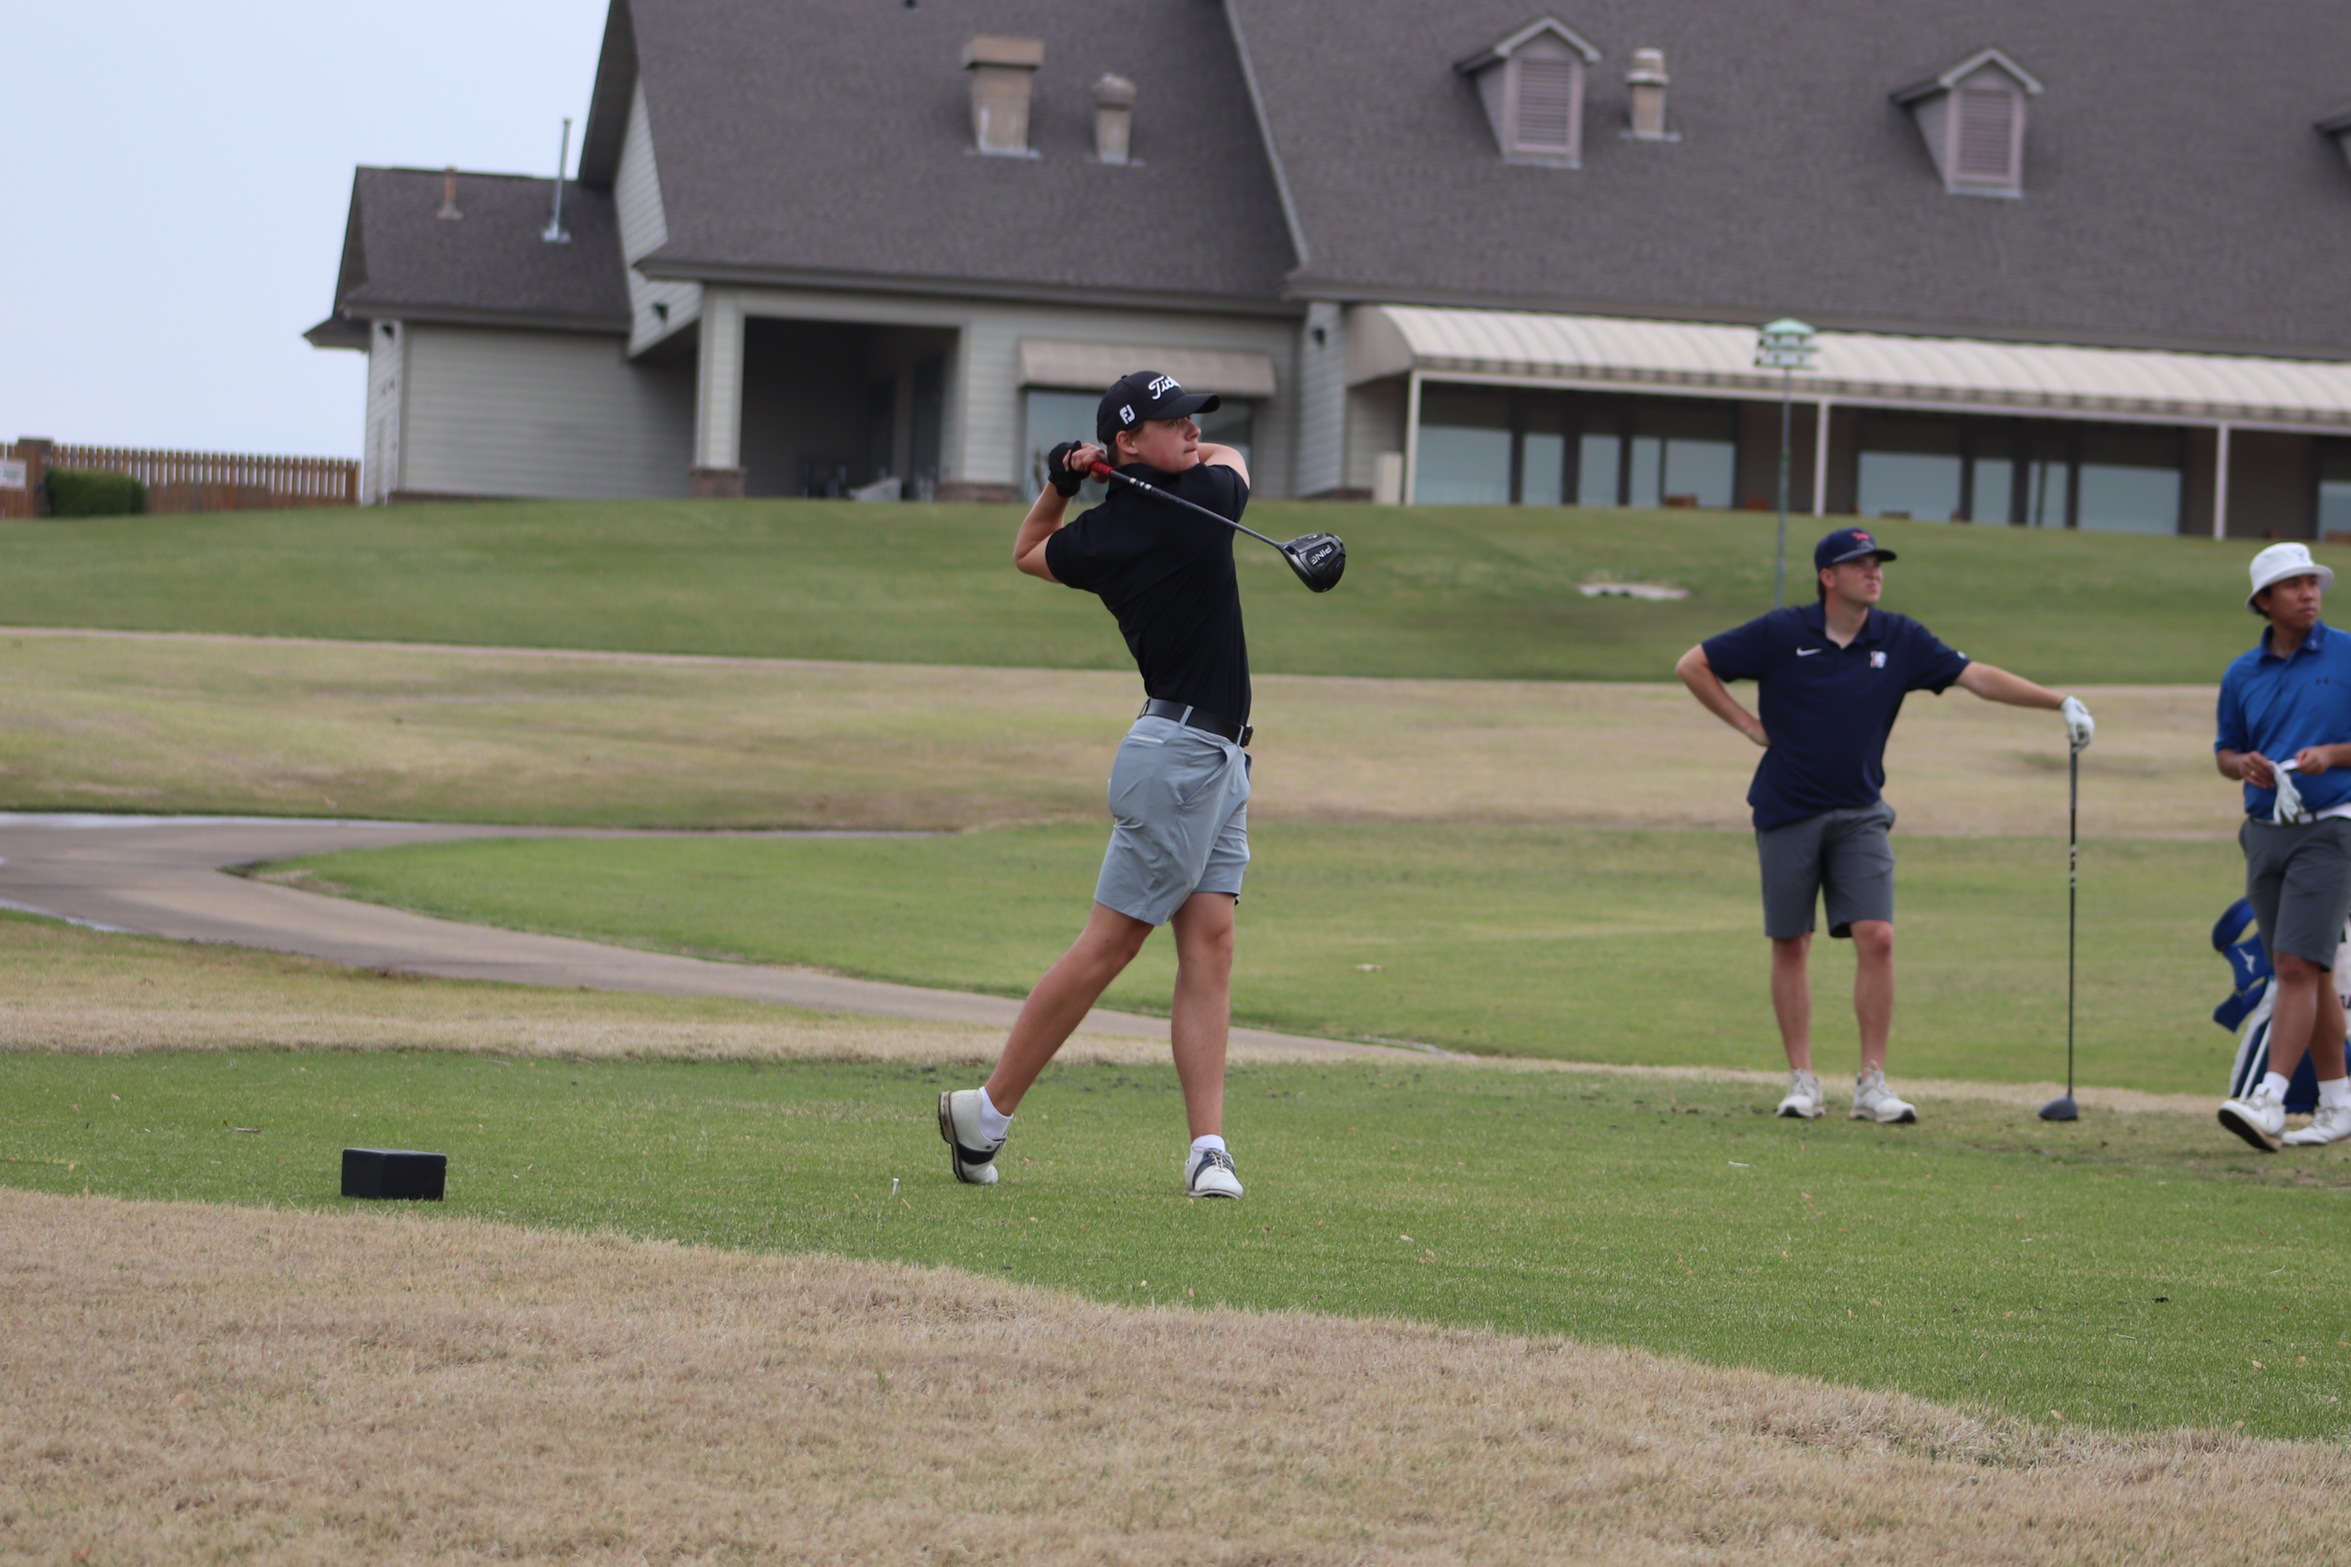 DeLange's Strong Showing Leads the Way at Missouri Baptist Spring Invitational